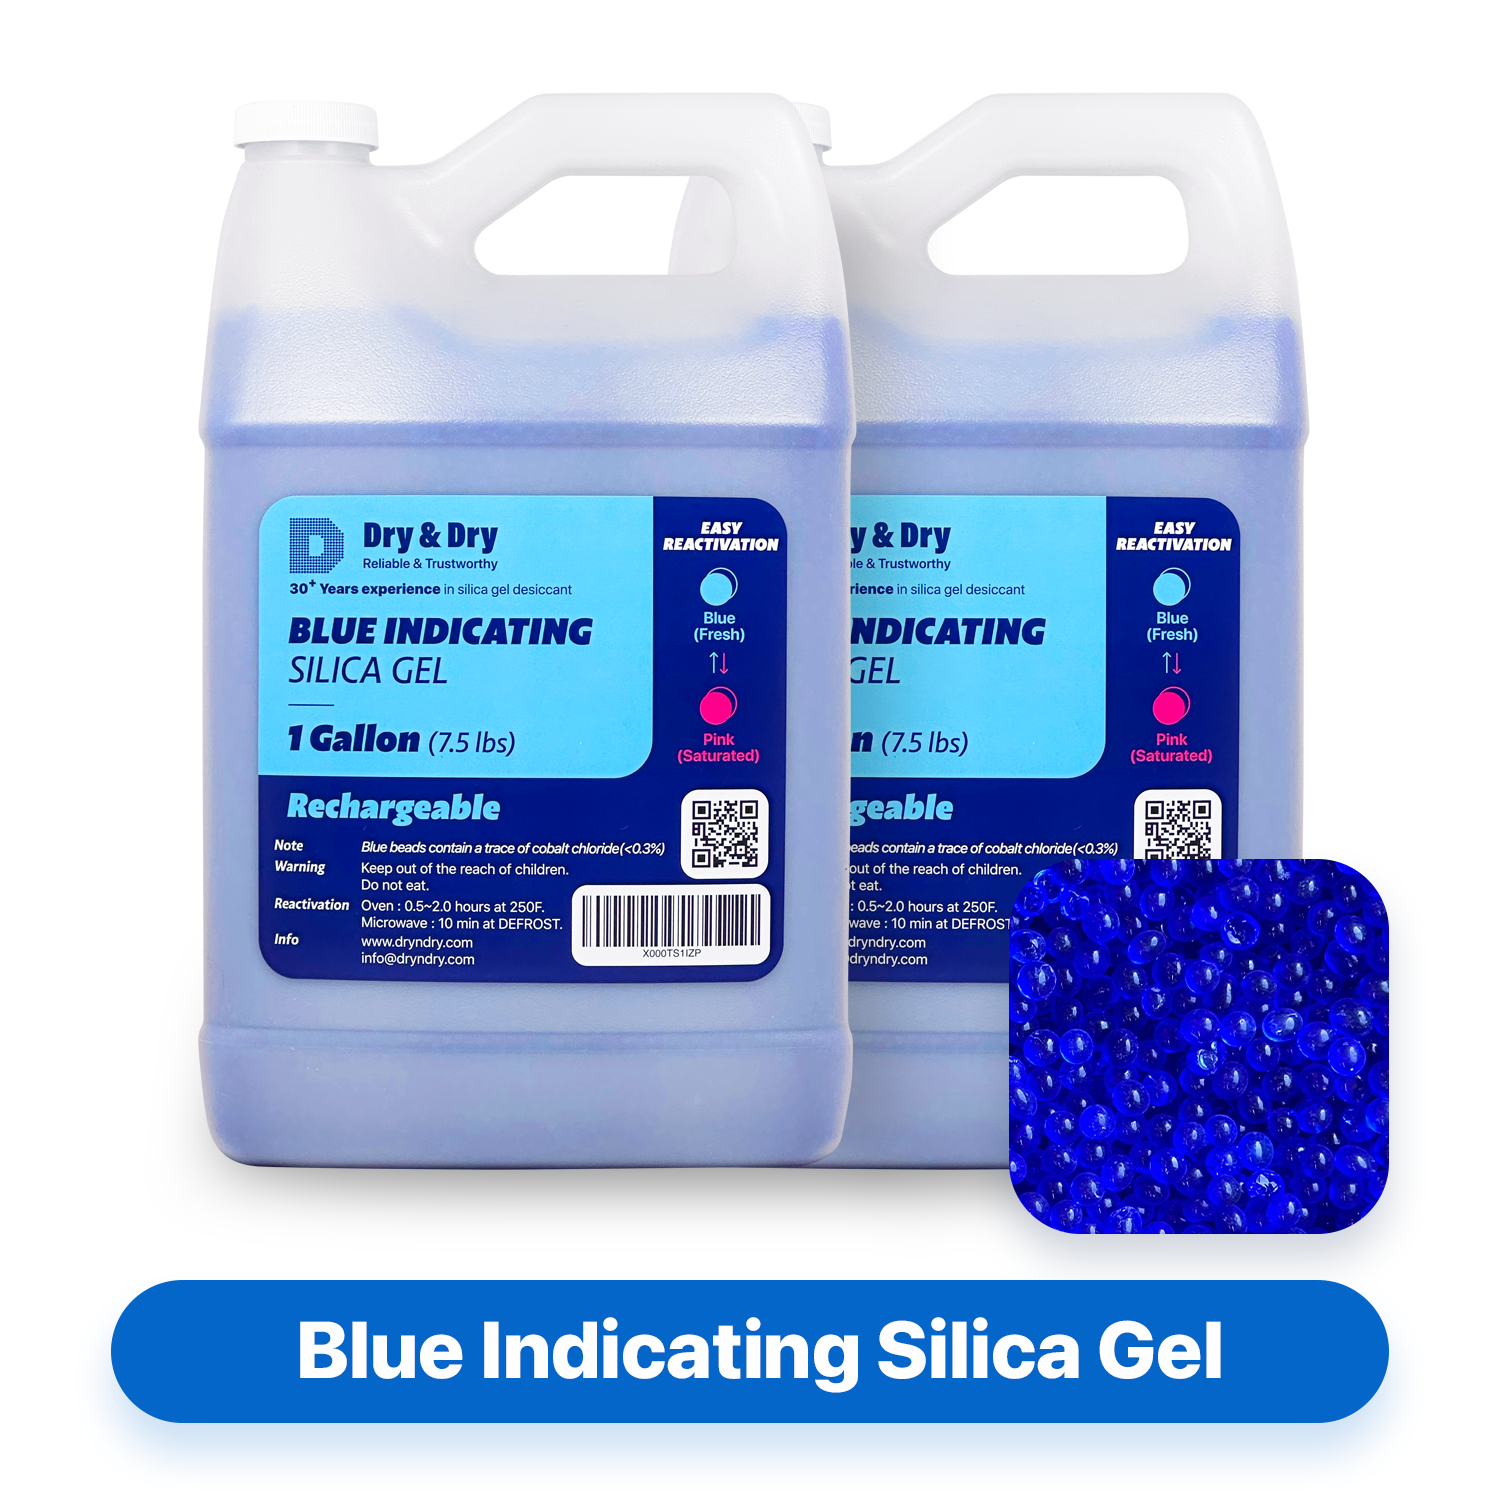 Dry & Dry 1 Gallon Premium Mixed Silicagel Beads with Blue Indicating Beads(Industry Standard 2-4mm) - 7 lbs Reusable